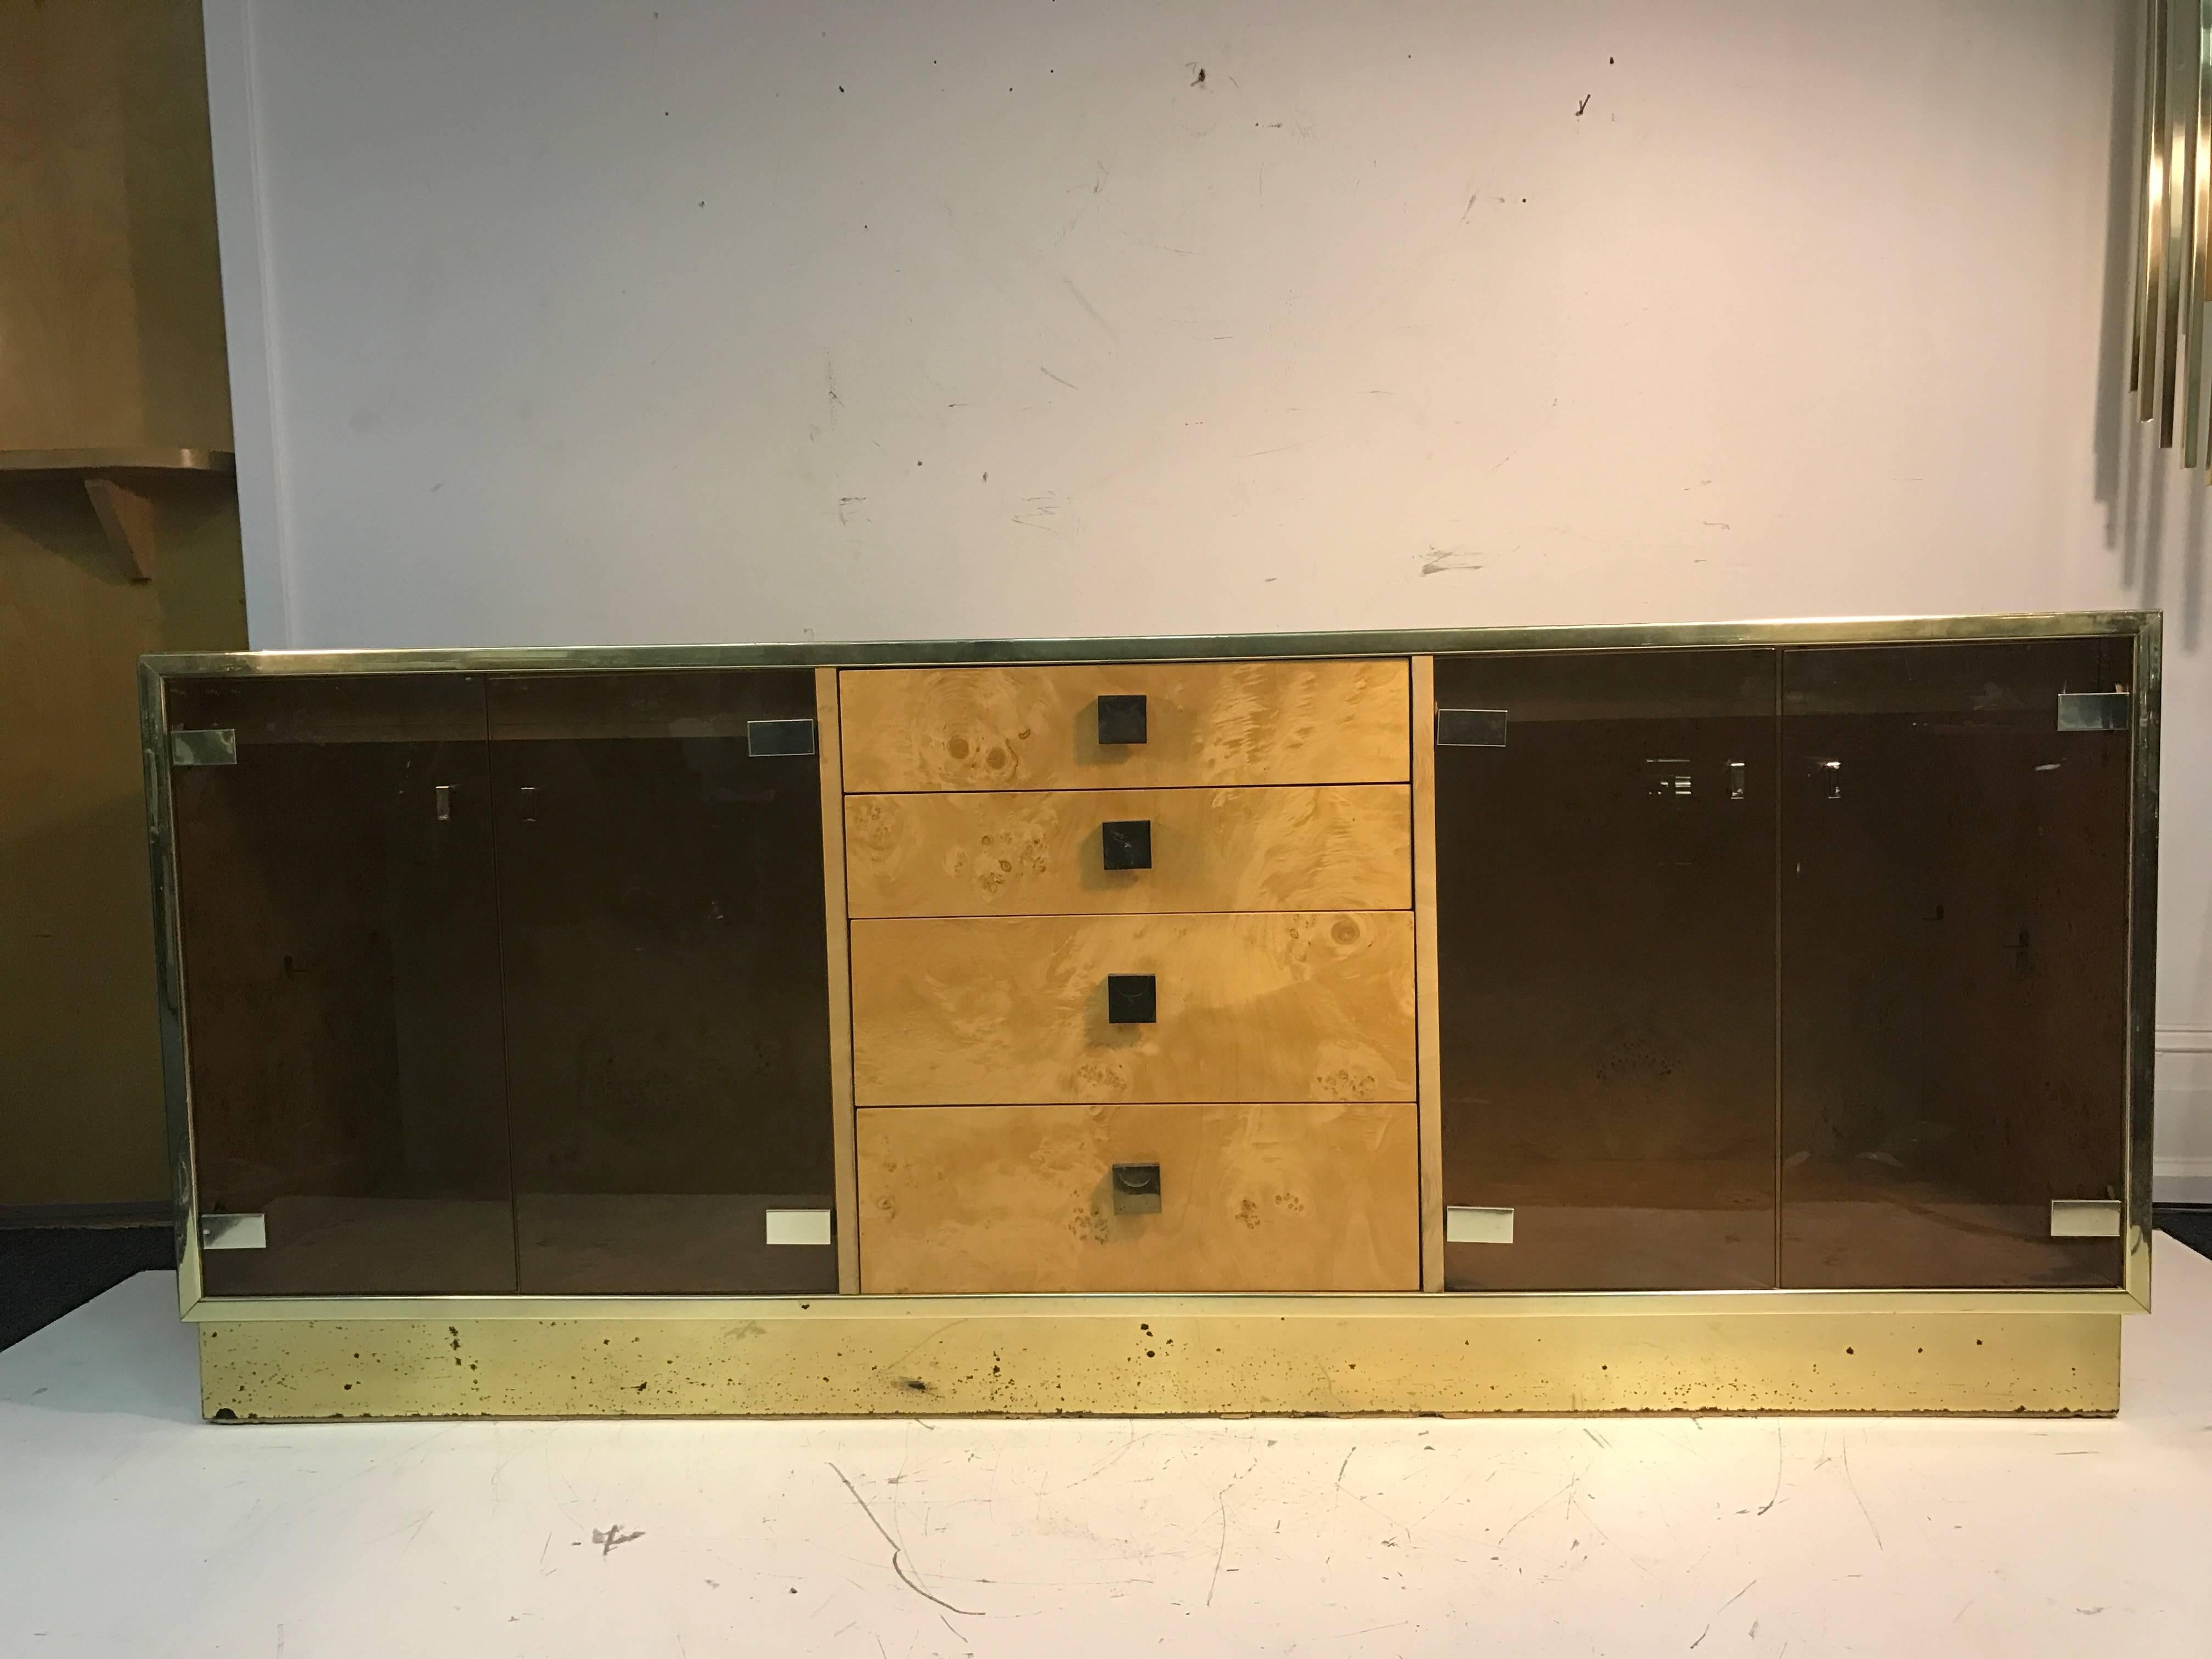 A magnificent burl wood sideboard, credenza, or cabinet with set of double glass doors, four drawers, and interior lighting by Milo Baughman. This versatile piece can be used for entertaining, storage, or displaying your favorite items. Good vintage